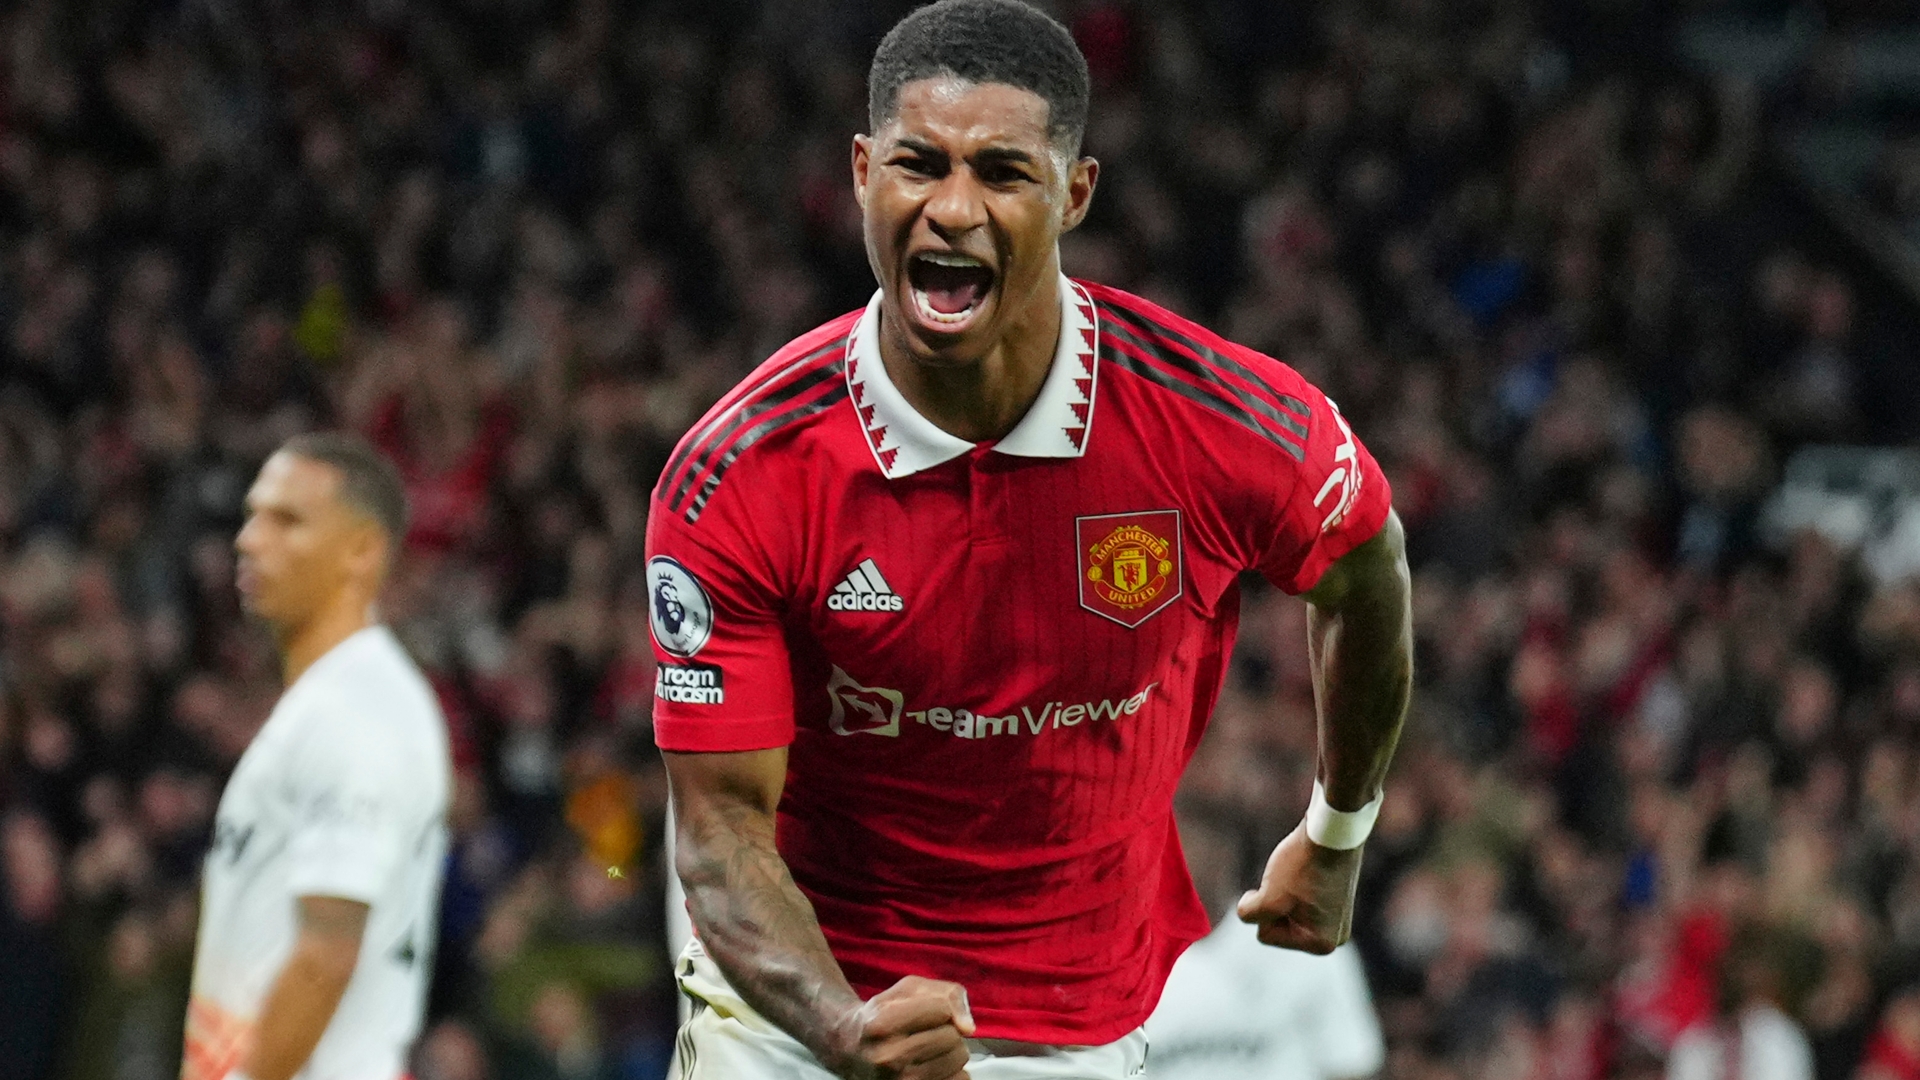 Wasn't In The Right Headspace' Utd Star Marcus Rashford Emotionally Opens Up On Tough 2021 22 As He Hits Top Form